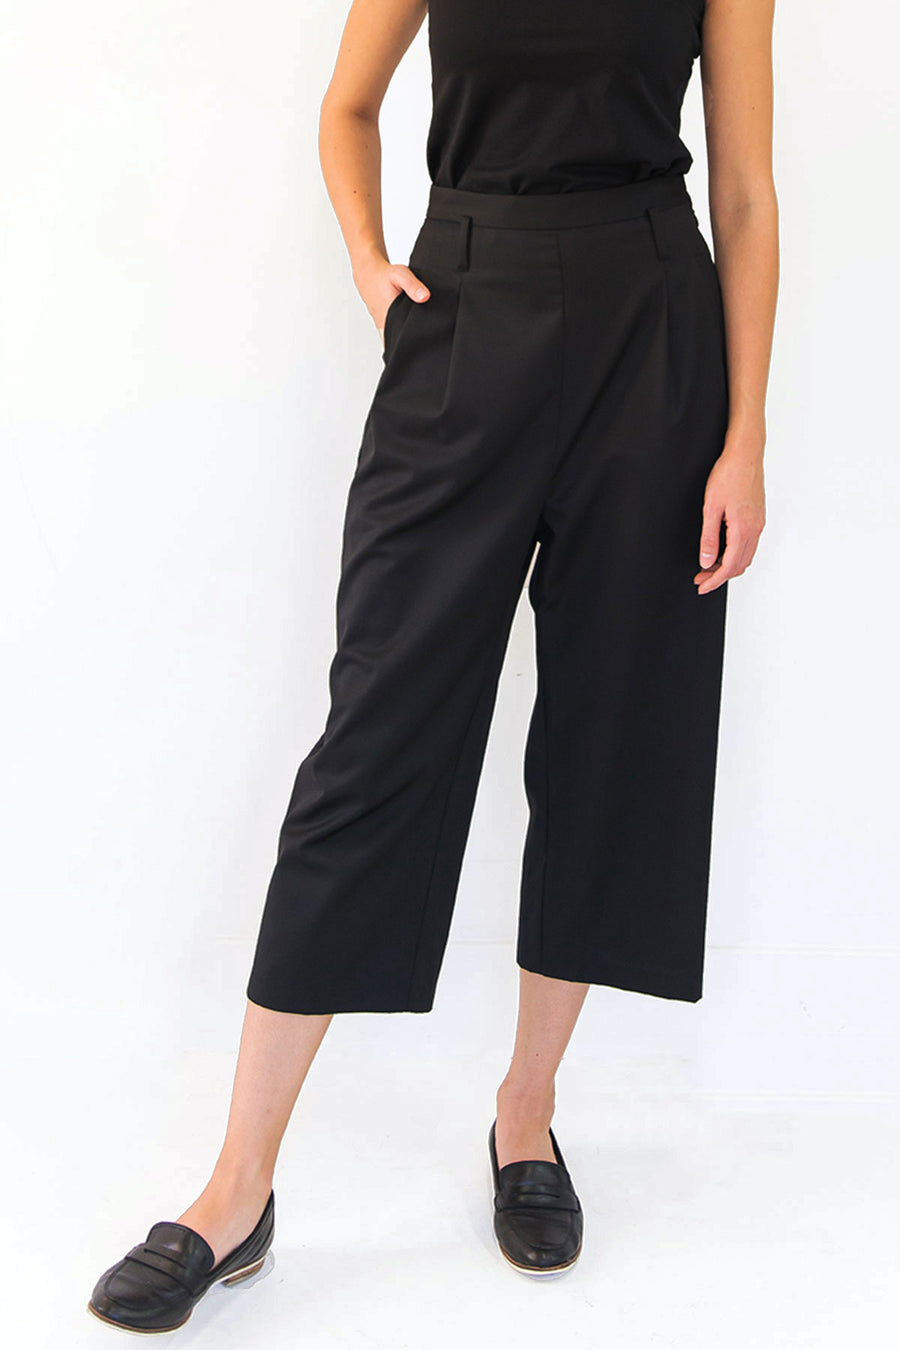 Black culottes with pockets